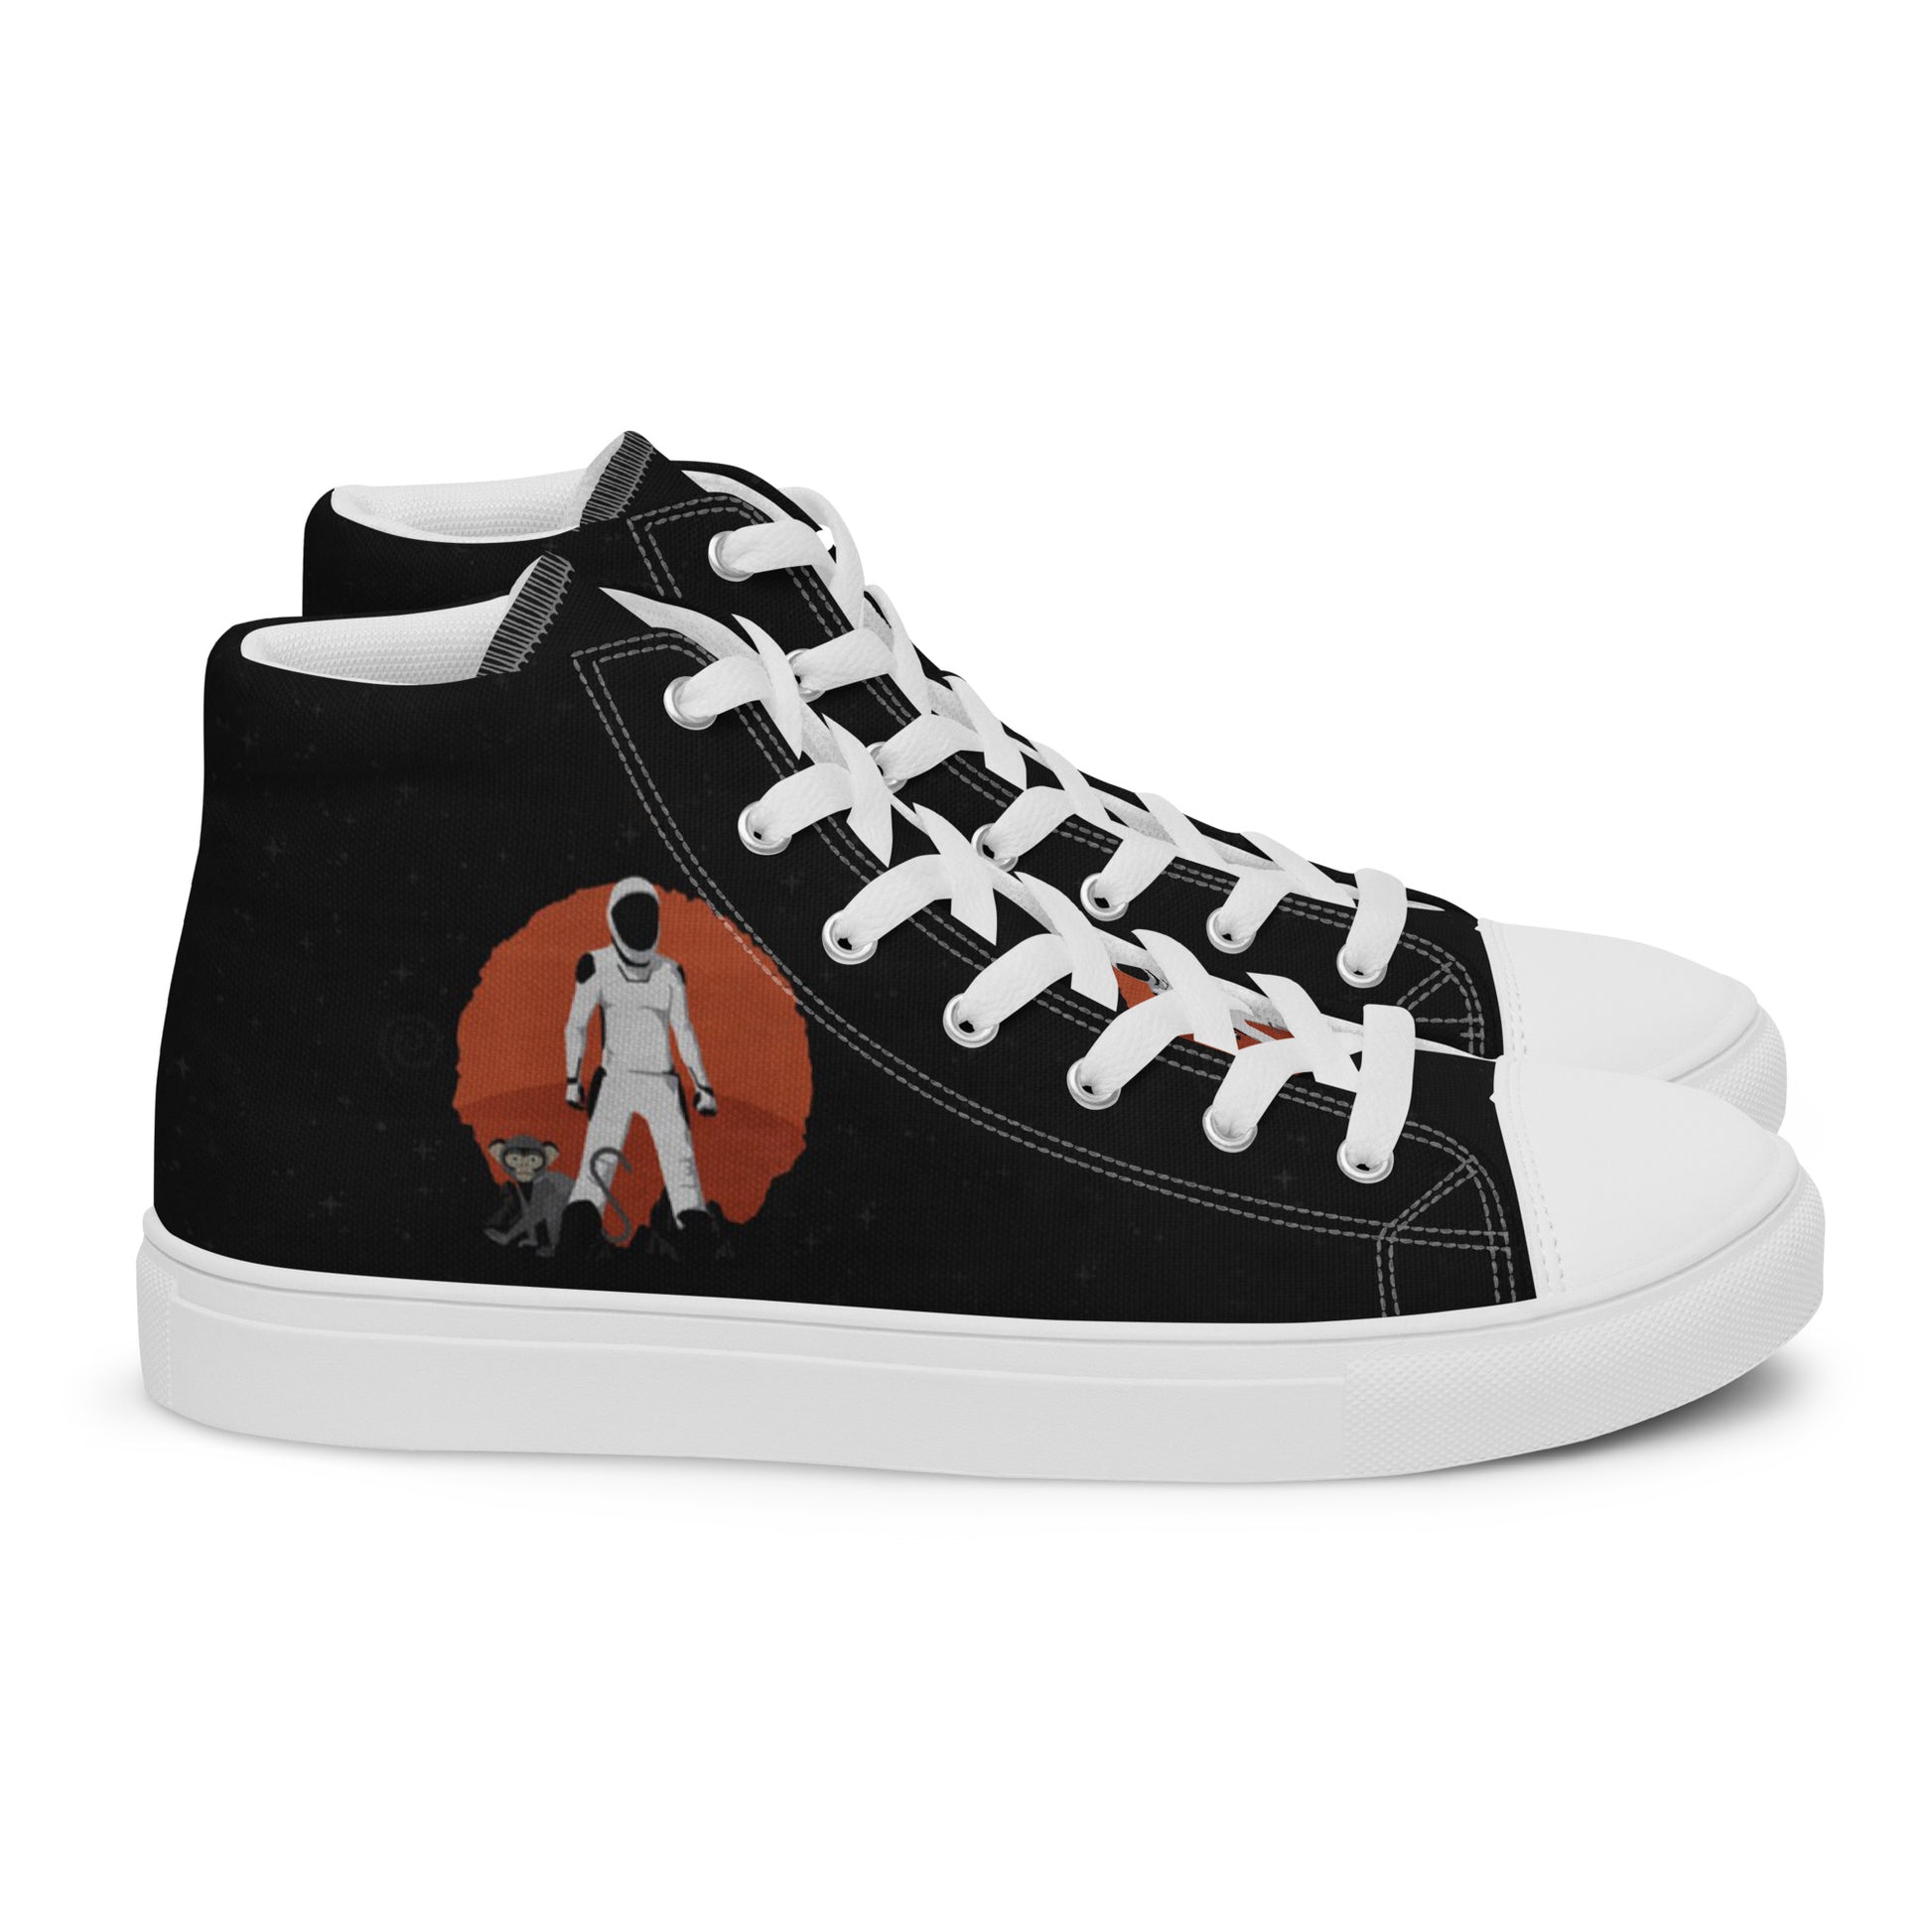 Men's Beyond Mars Edition High Top Sneakers - LuminoPlace